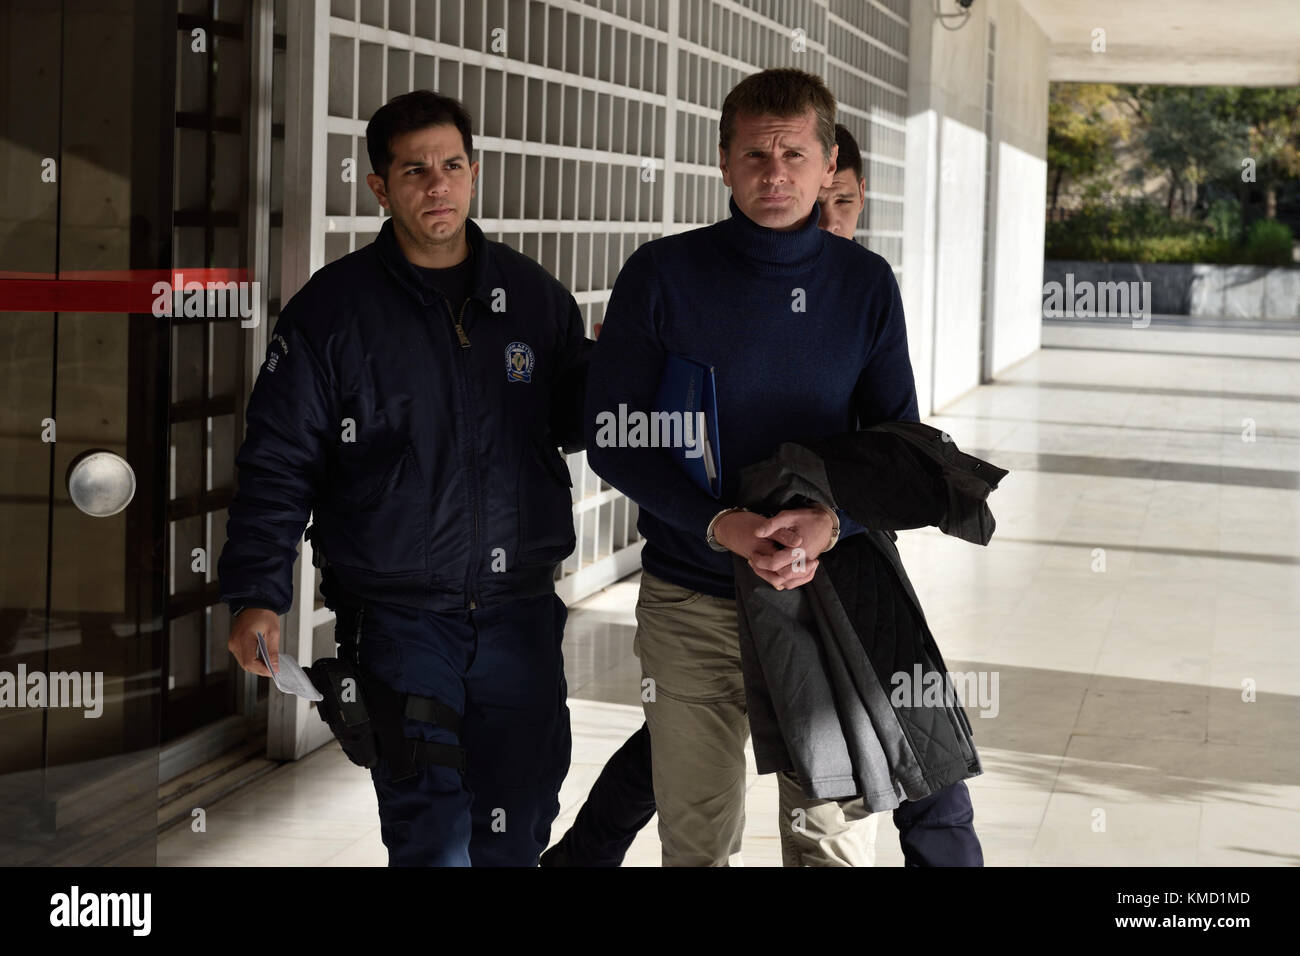 Athens, Greece, 6th Dec. 2017. Police officers escort Russian bitcoin fraud suspect Alexander Vinnik as he leaves Supreme Court following a hearing of his appeal against extradition to the US in Athens, Greece. Credit: Nicolas Koutsokostas/Alamy Live News Stock Photo